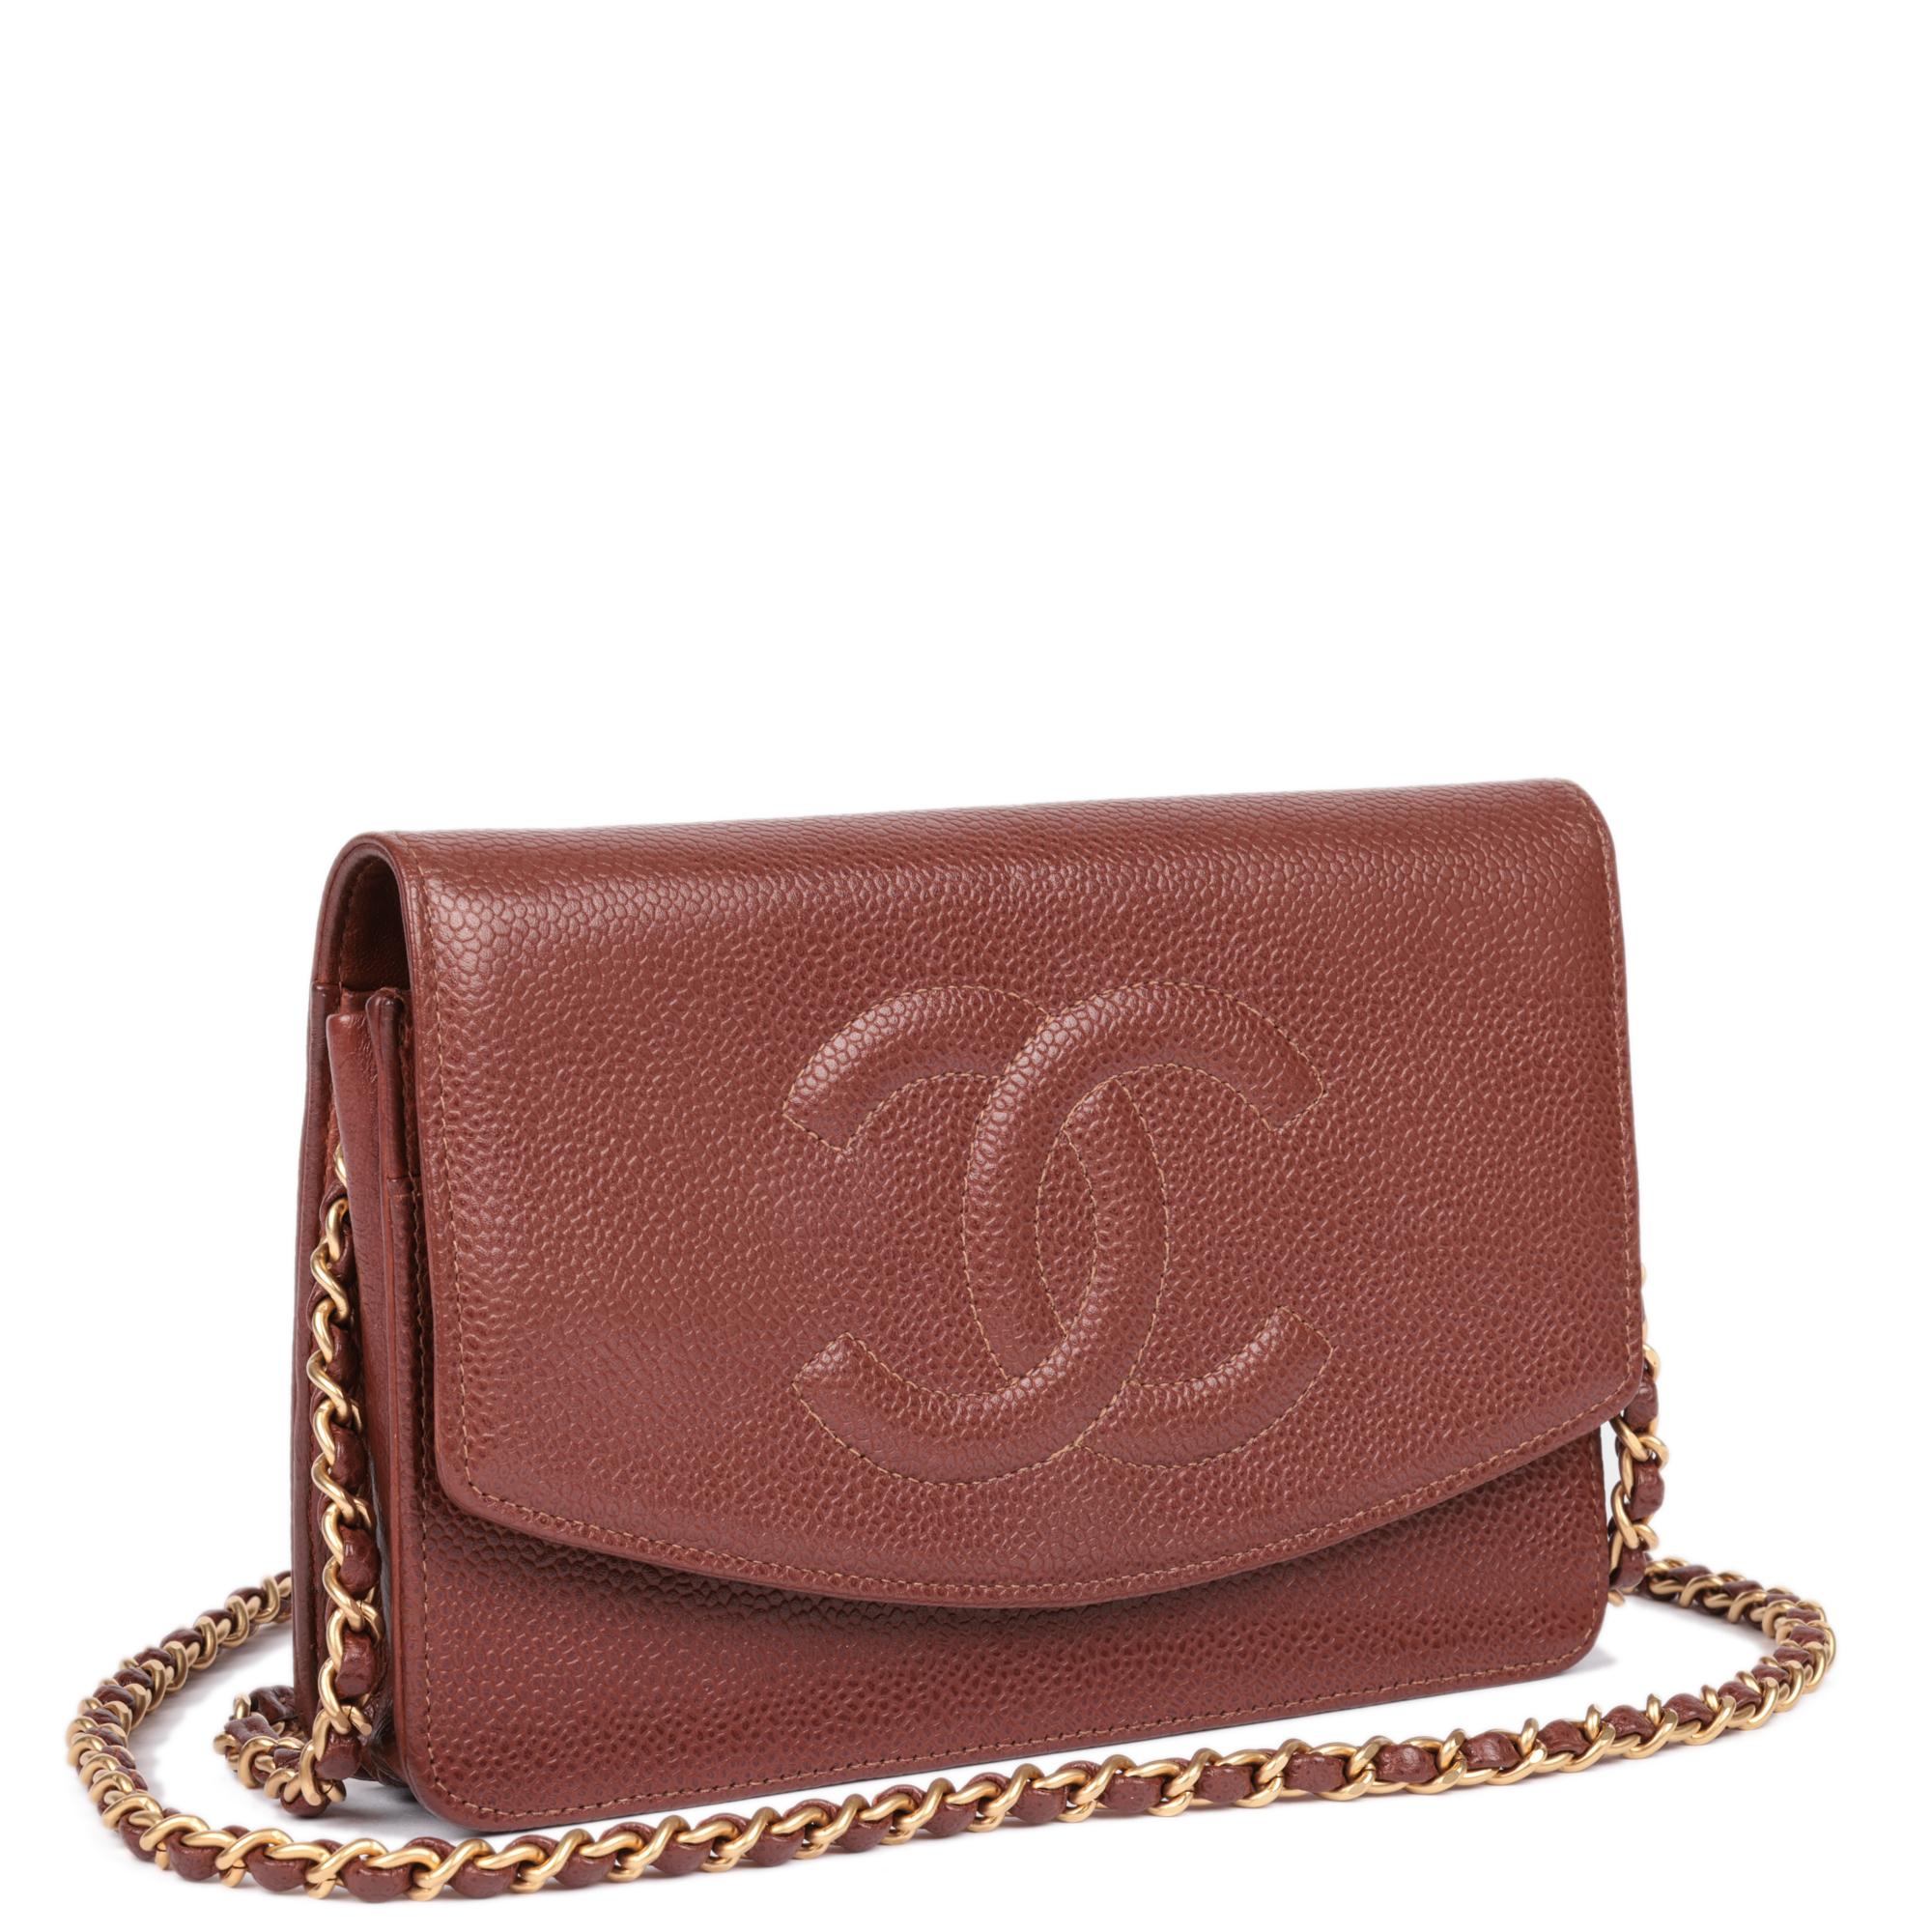 CHANEL
Brown Caviar Leather Vintage Timeless Wallet-on-Chain

Serial Number: 7107746
Age (Circa): 2002
Accompanied By: Chanel Dust Bag, Authenticity Card
Authenticity Details: Authenticity Card, Serial Sticker (Made in France)
Gender: Ladies
Type: